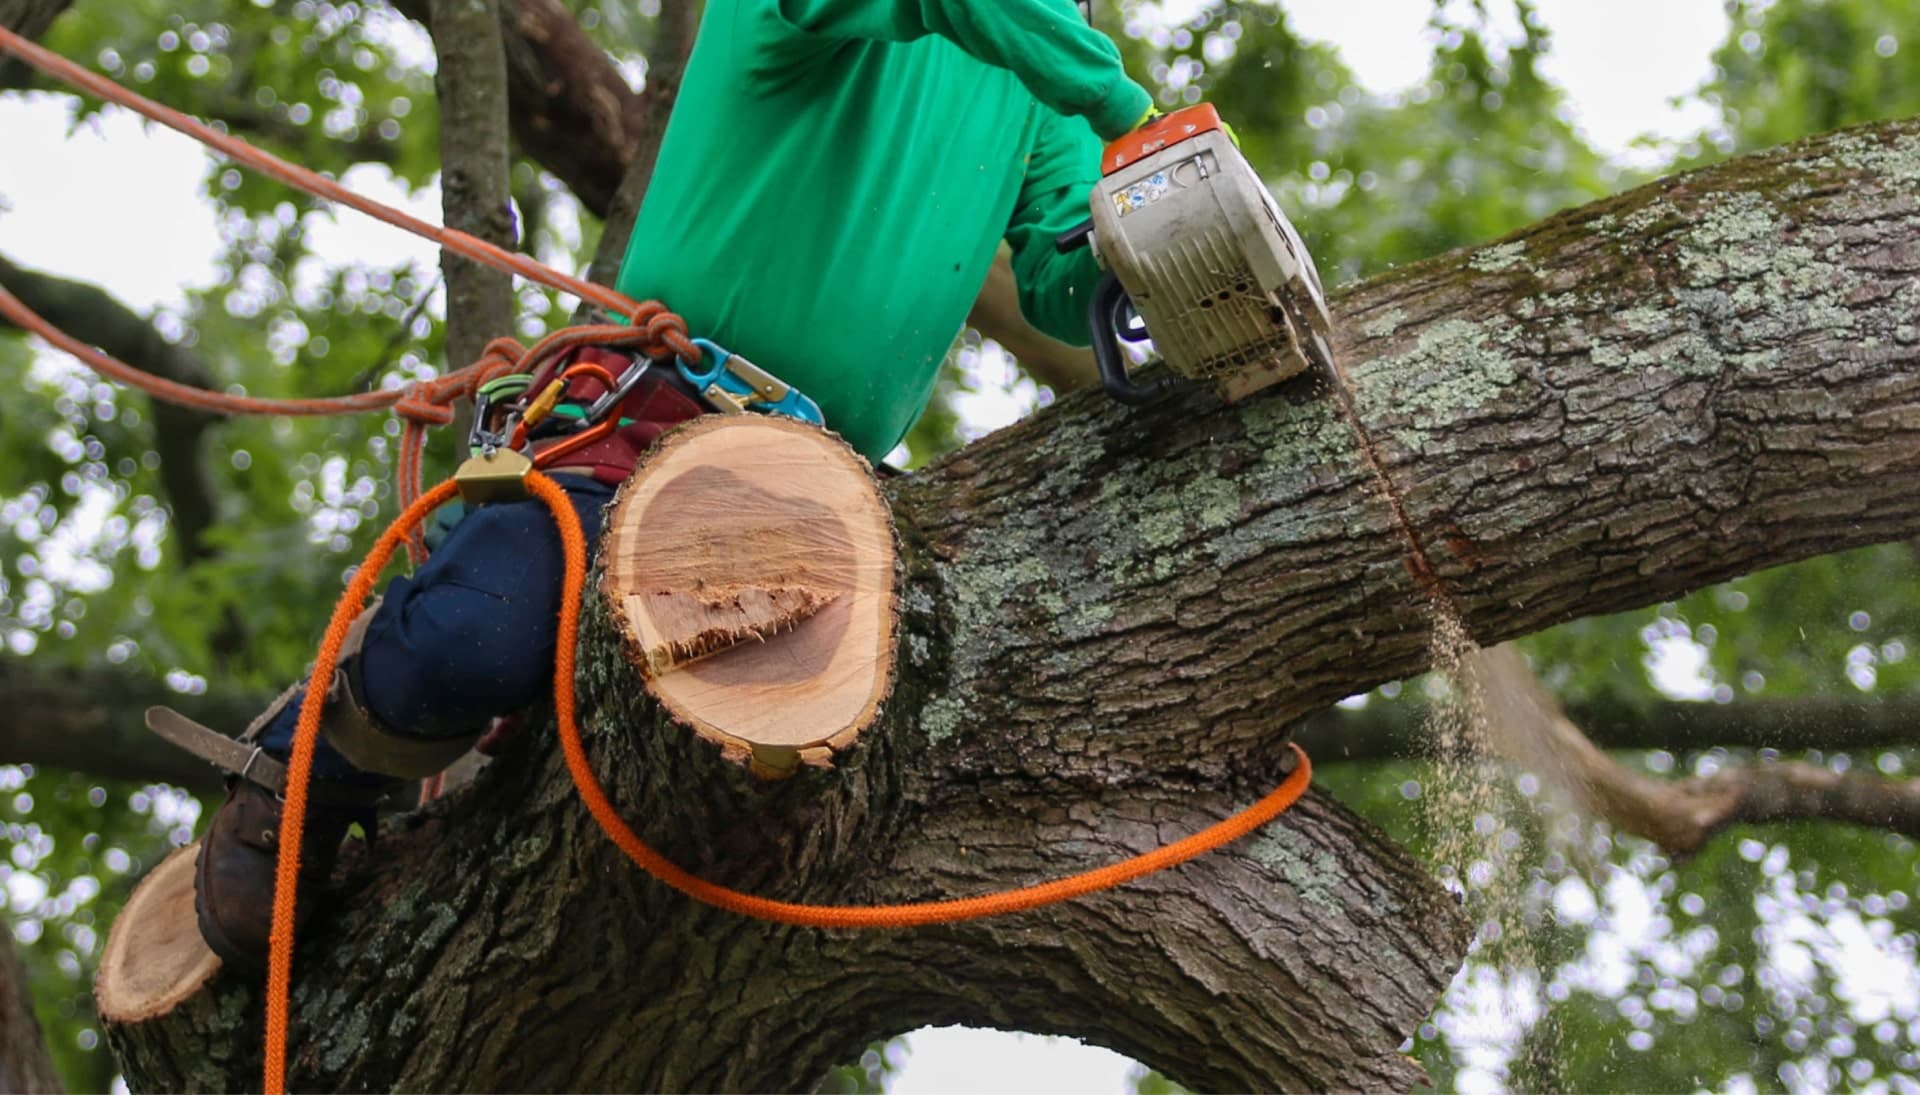 Shed your worries away with best tree removal in New York City